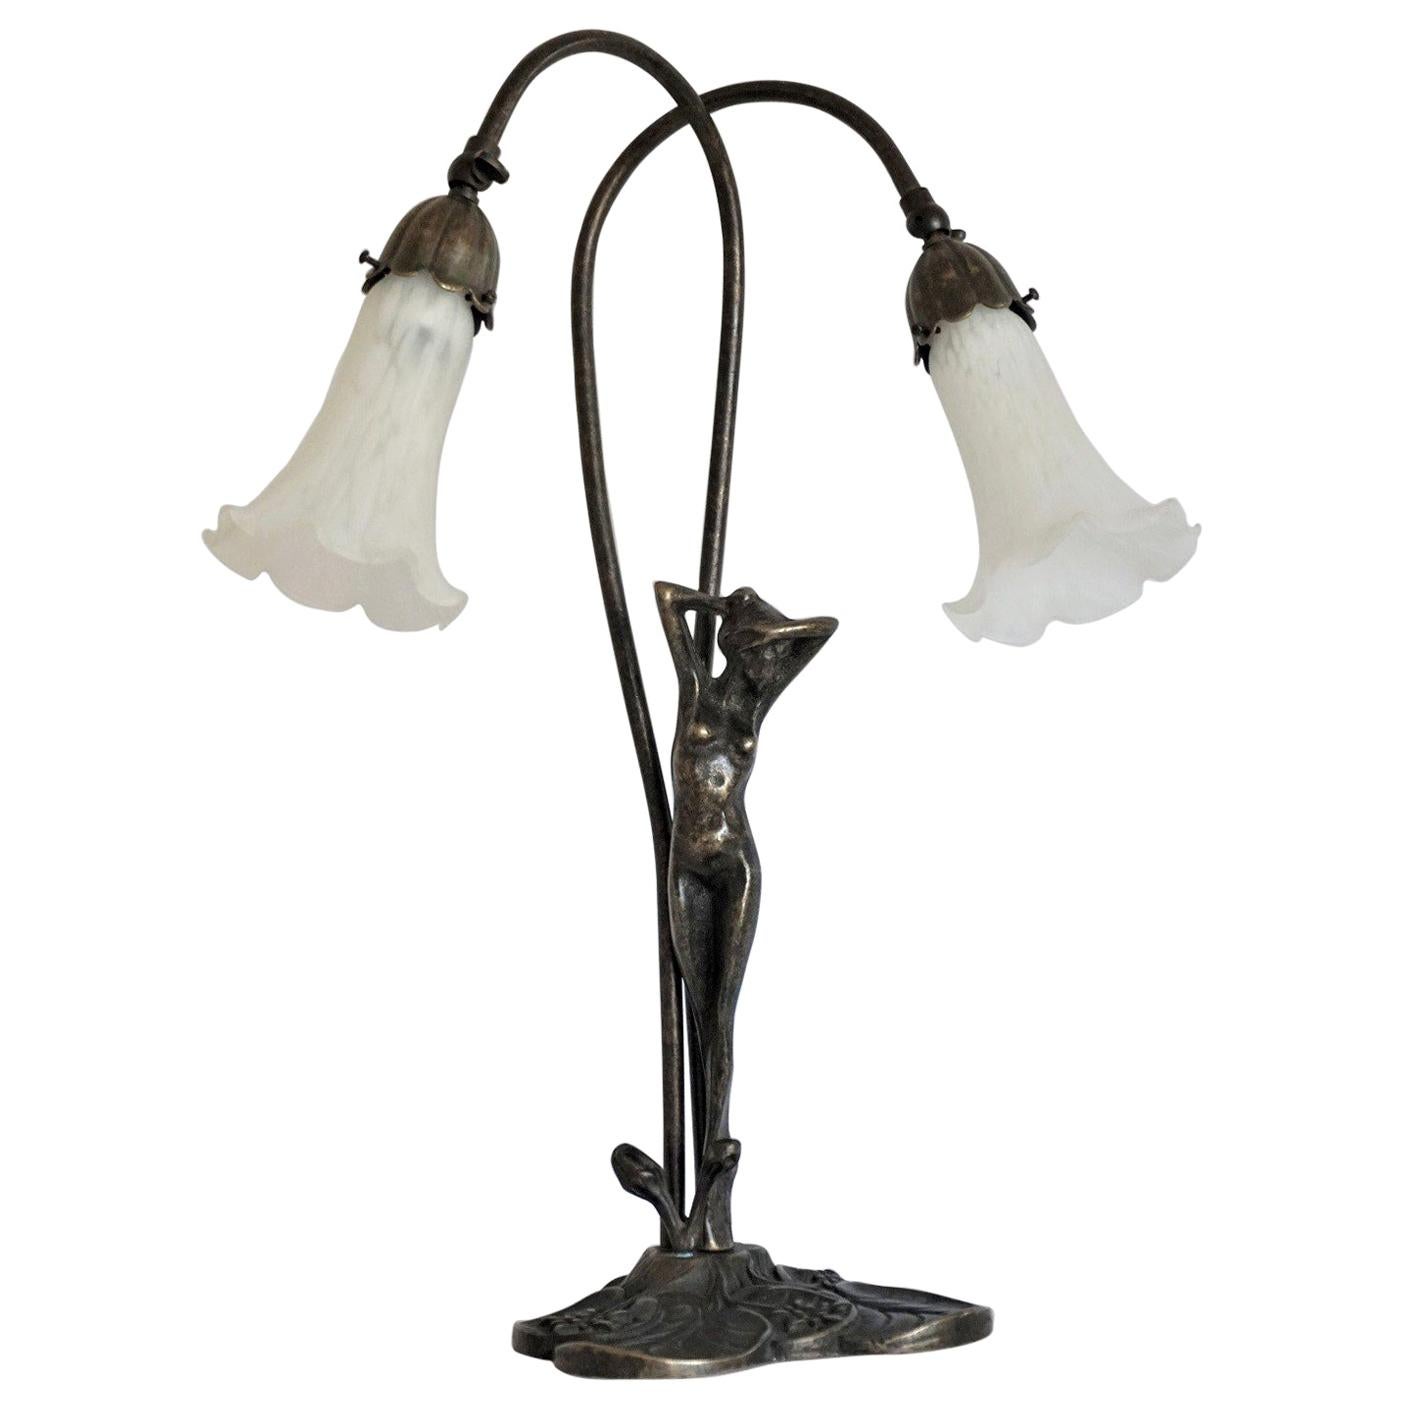 Art Deco bronze figurine double arm table lamp with white art glass tulip shades, France, circa 1930-1939. The adjustable two arms allow variable settings and width.
This wonderful table lamp is in very good condition, with beautiful patina,